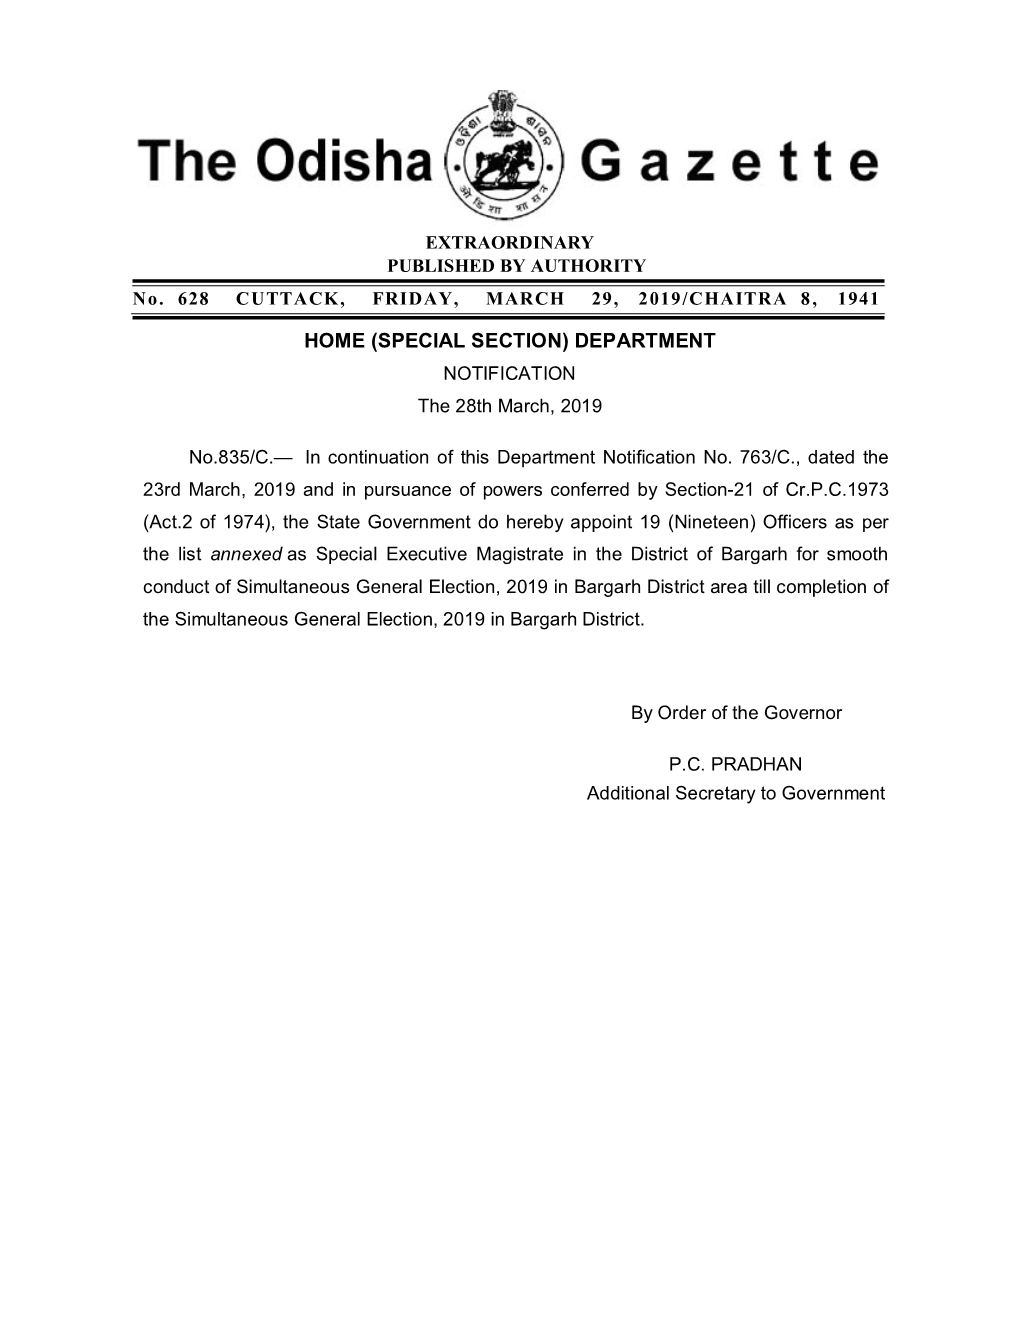 HOME (SPECIAL SECTION) DEPARTMENT NOTIFICATION the 28Th March, 2019